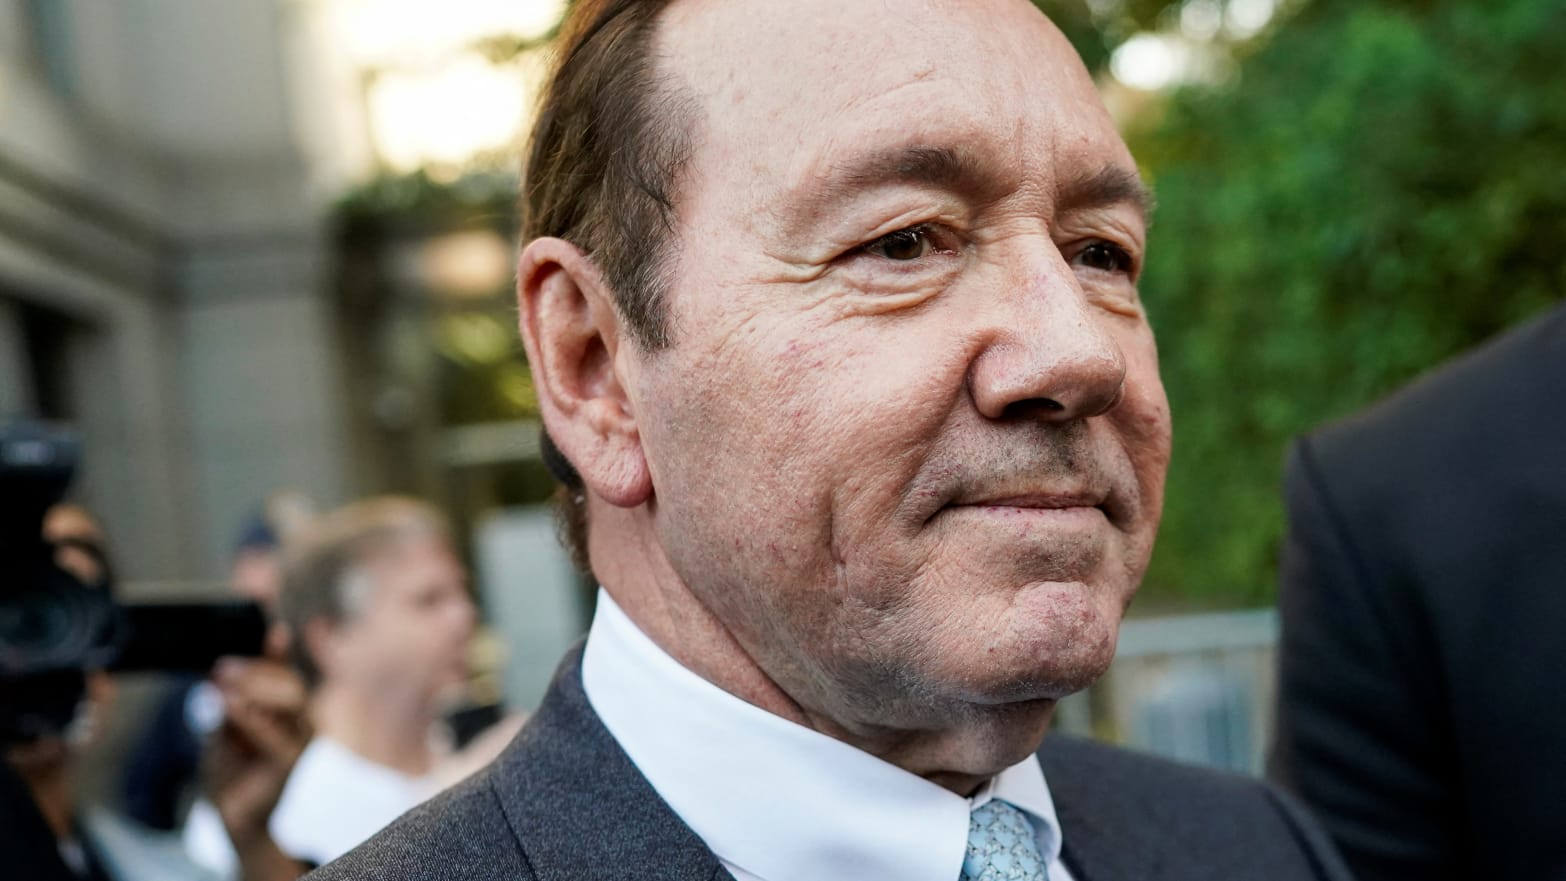 Kevin Spacey Lawsuit Fight with Anthony Rapp Over Sexual Assault Comes to Close hq photo